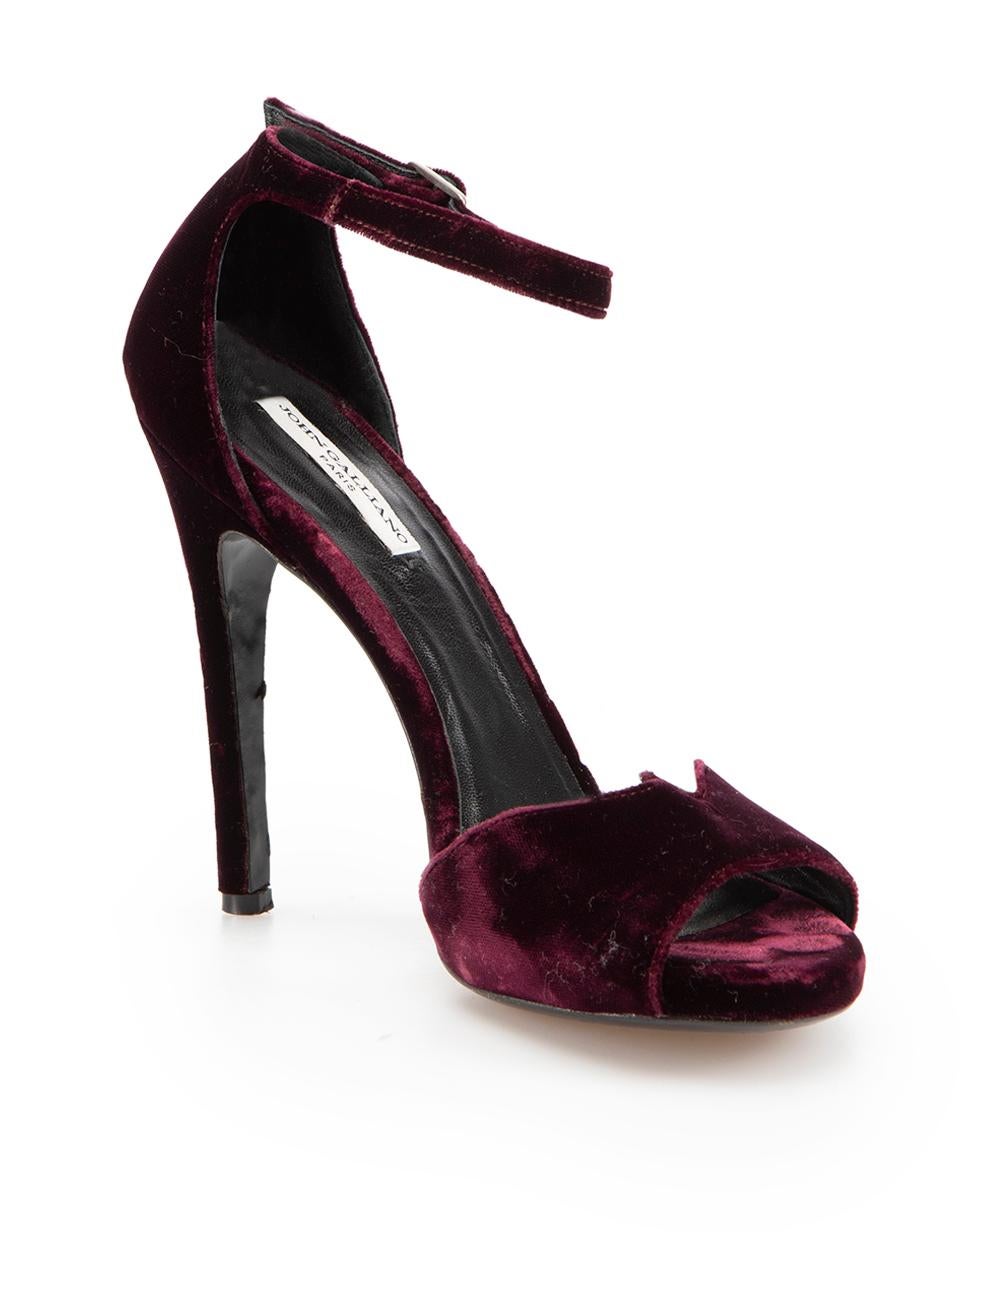 CONDITION is Very good. Minimal wear to shoes is evident. Minimal wear to both footbeds and heels with small impressions to the velvet on this used John Galliano designer resale item.



Details


Vintage

Burgundy

Velvet

Peep toe heels

Ankle